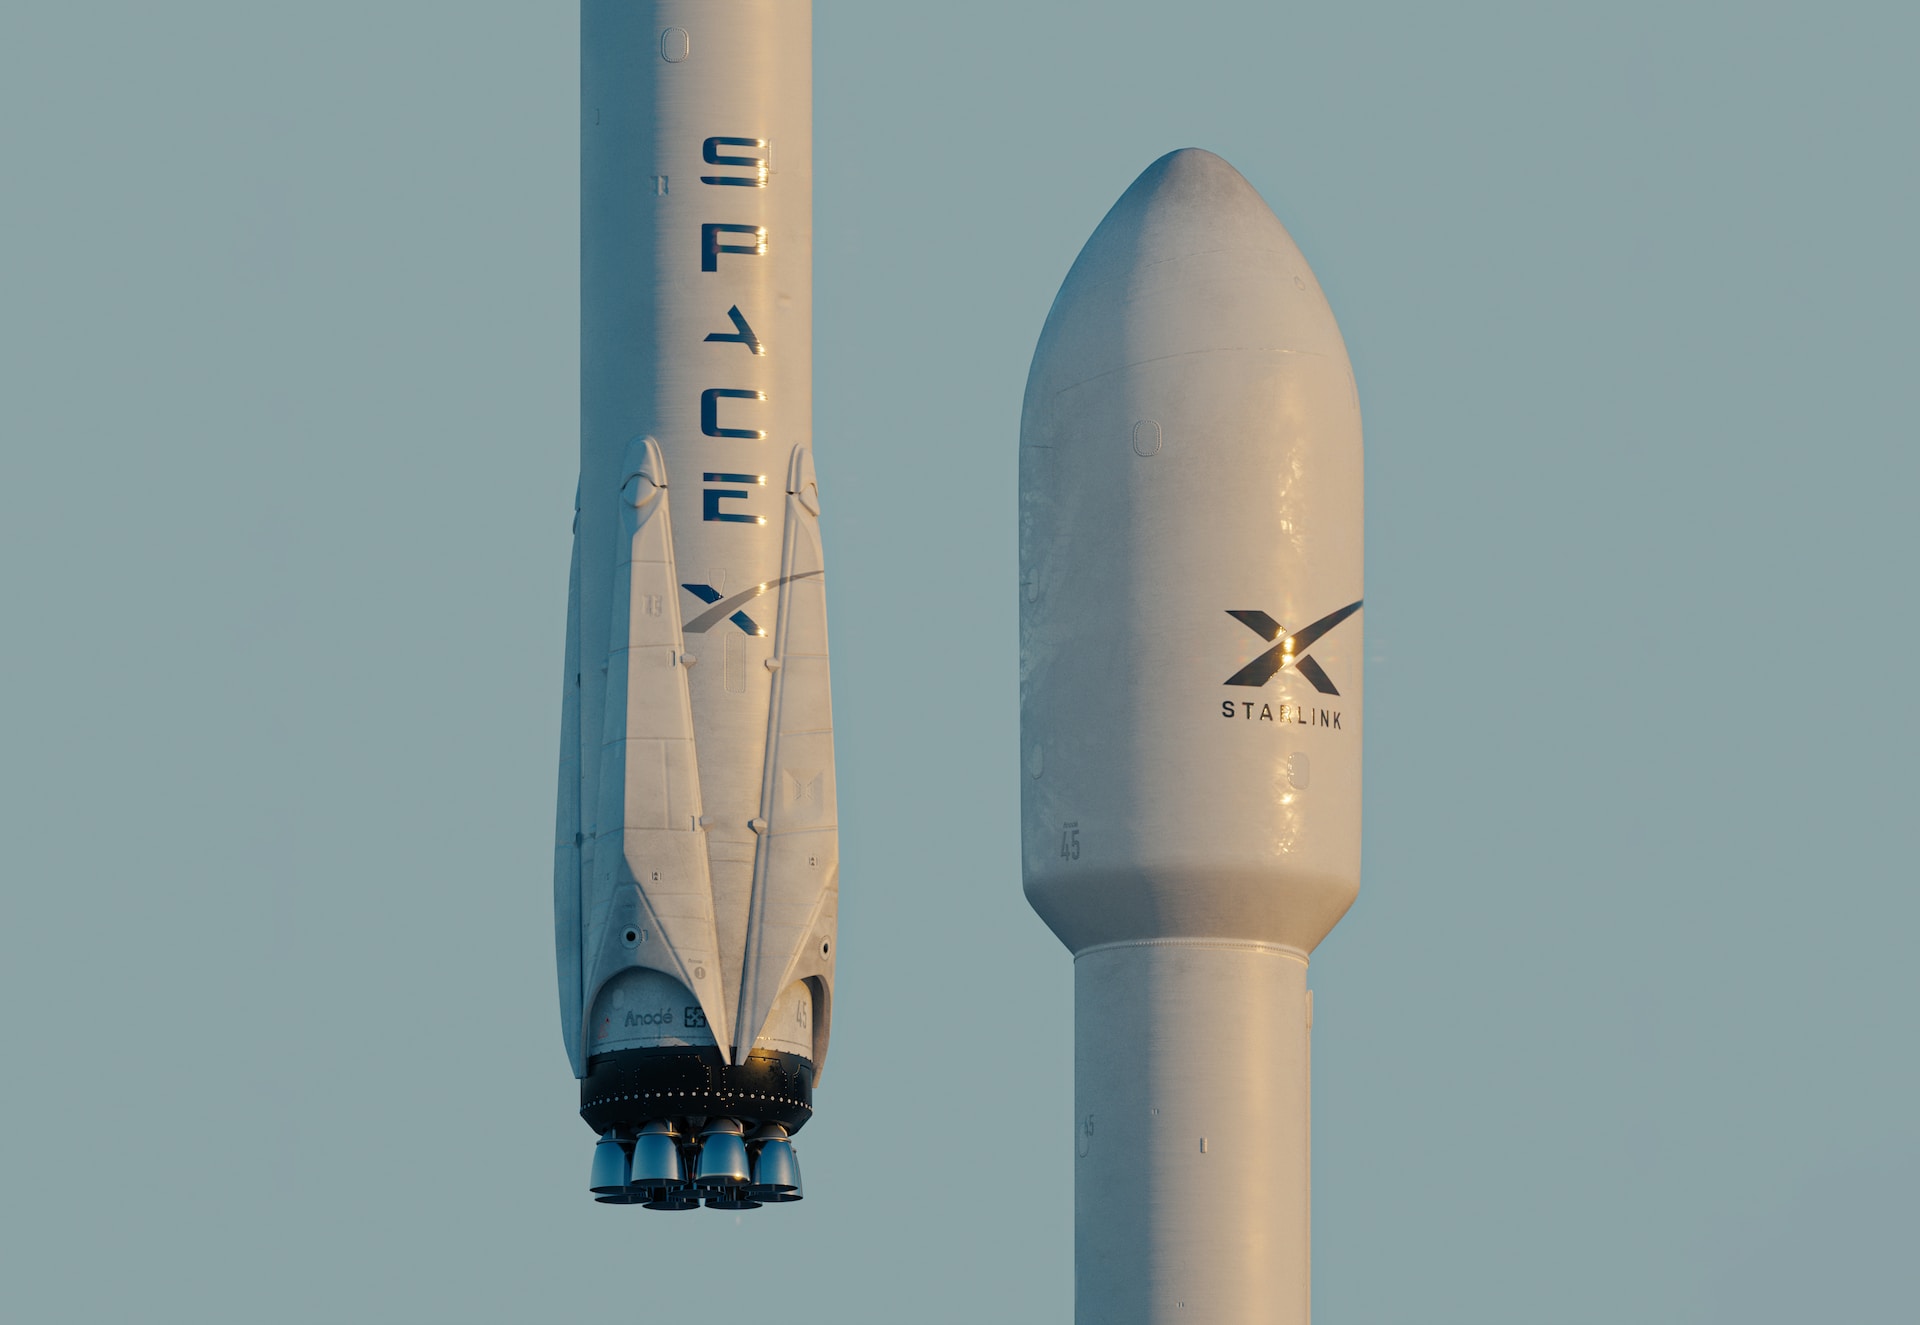 Spacex rockets, which carry Starlink satellites into orbit